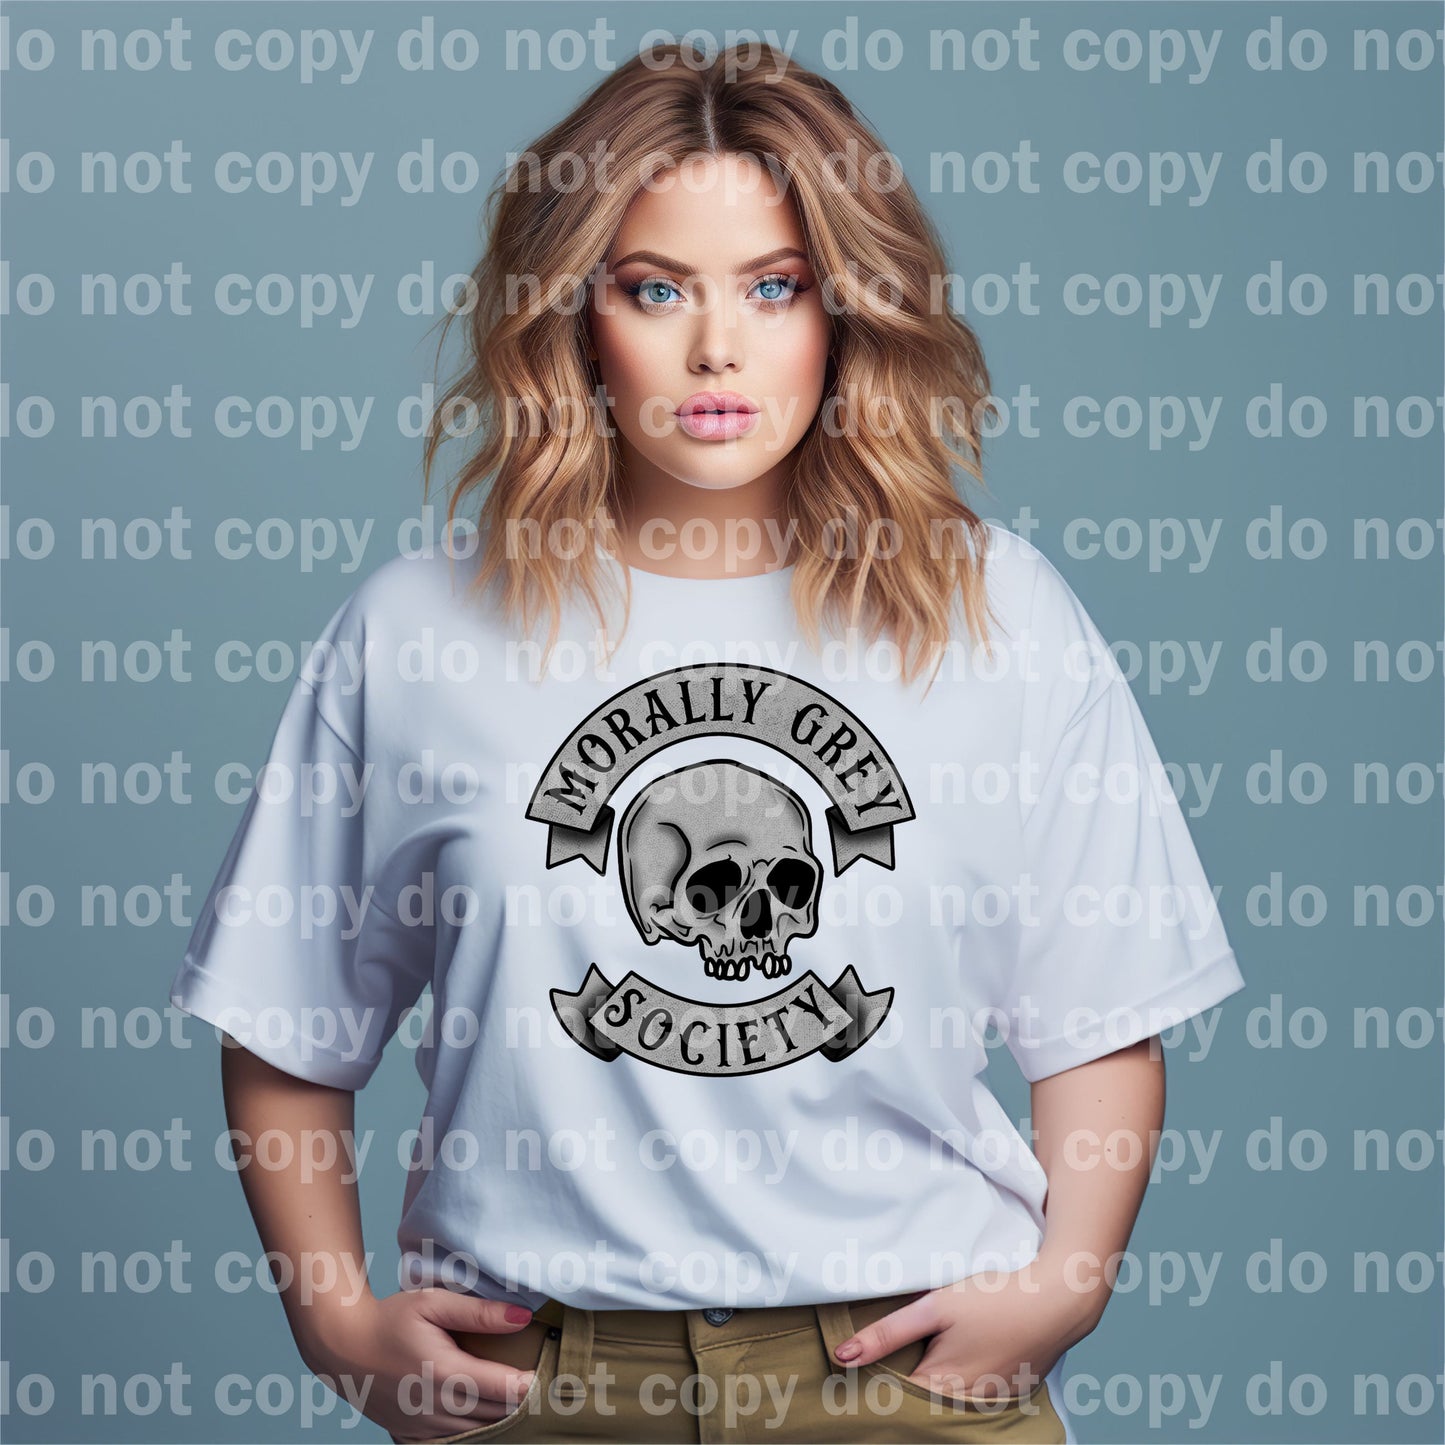 Morally Grey Society Full Color/One Color Dream Print or Sublimation Print